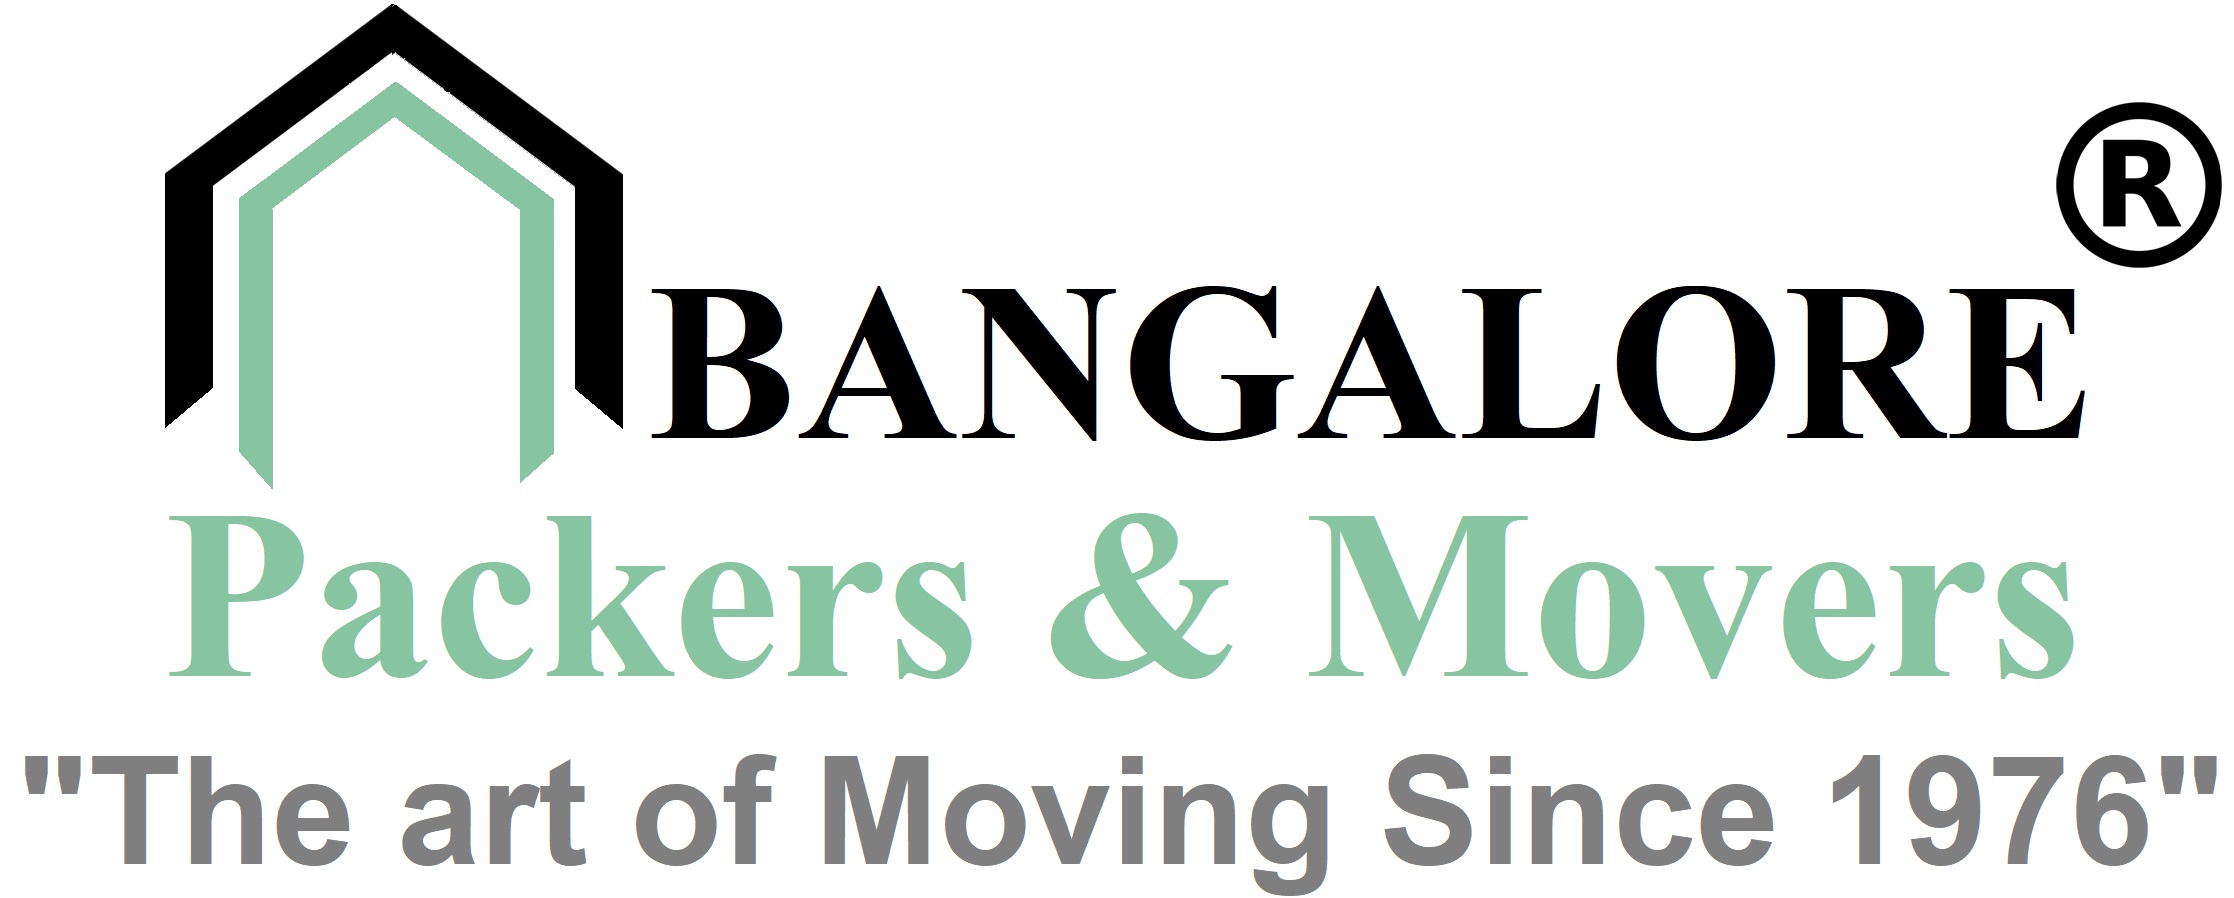 Bangalore Packer And Movers